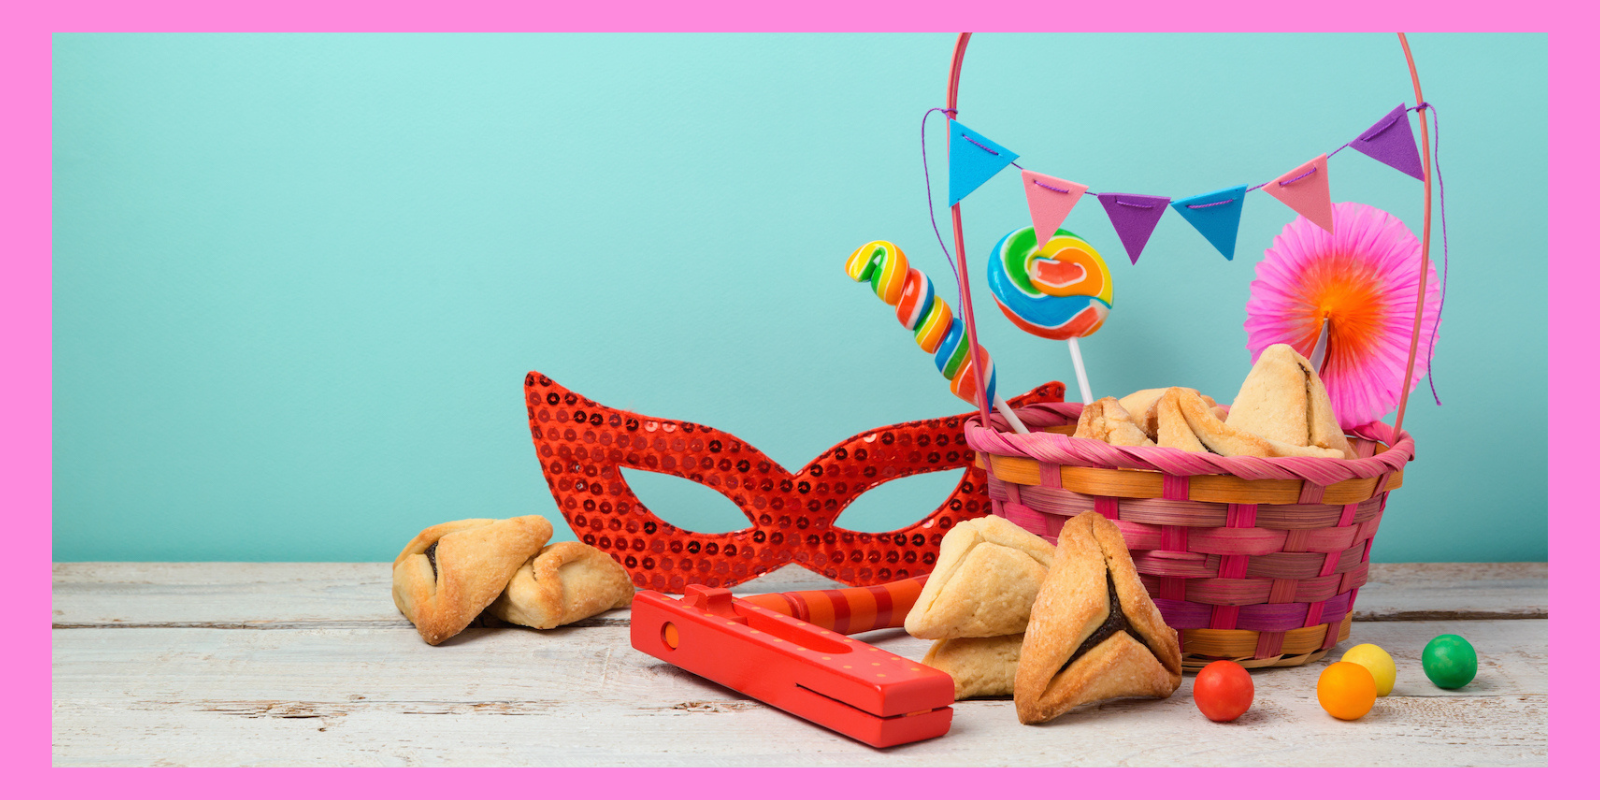 A pink frame surrounds a photo of a mishloach manot, a gift basket specifically given to friends on Purim. The basket contains hamentaschen, a mask, noise makers, and other treats.